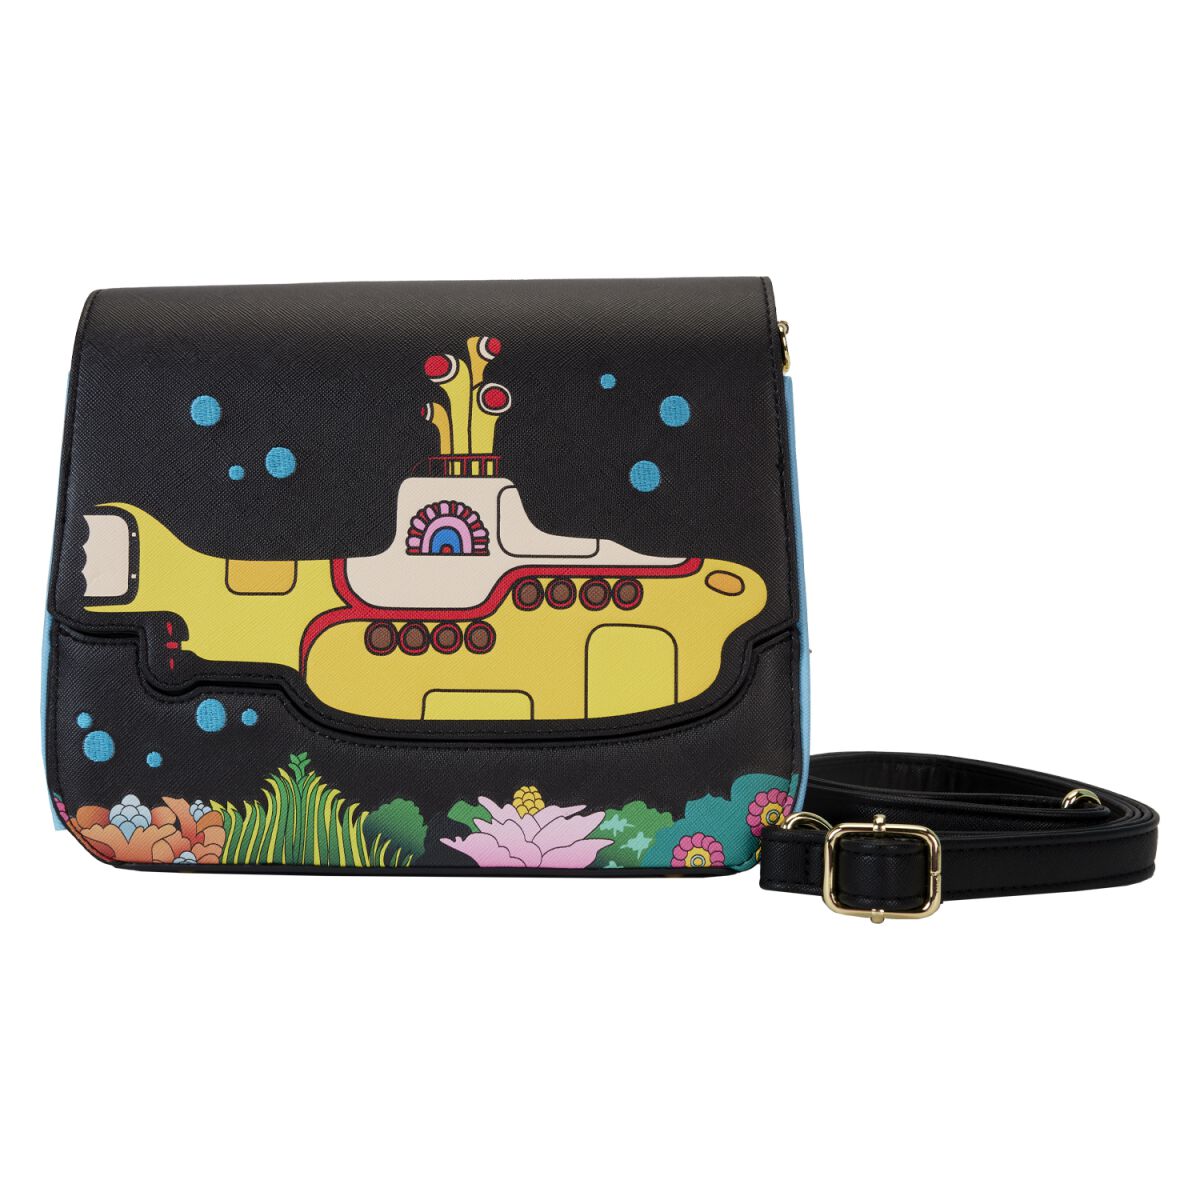 Image of Borsa a tracolla di The Beatles - Loungefly - Yellow Submarine - Donna - multicolore